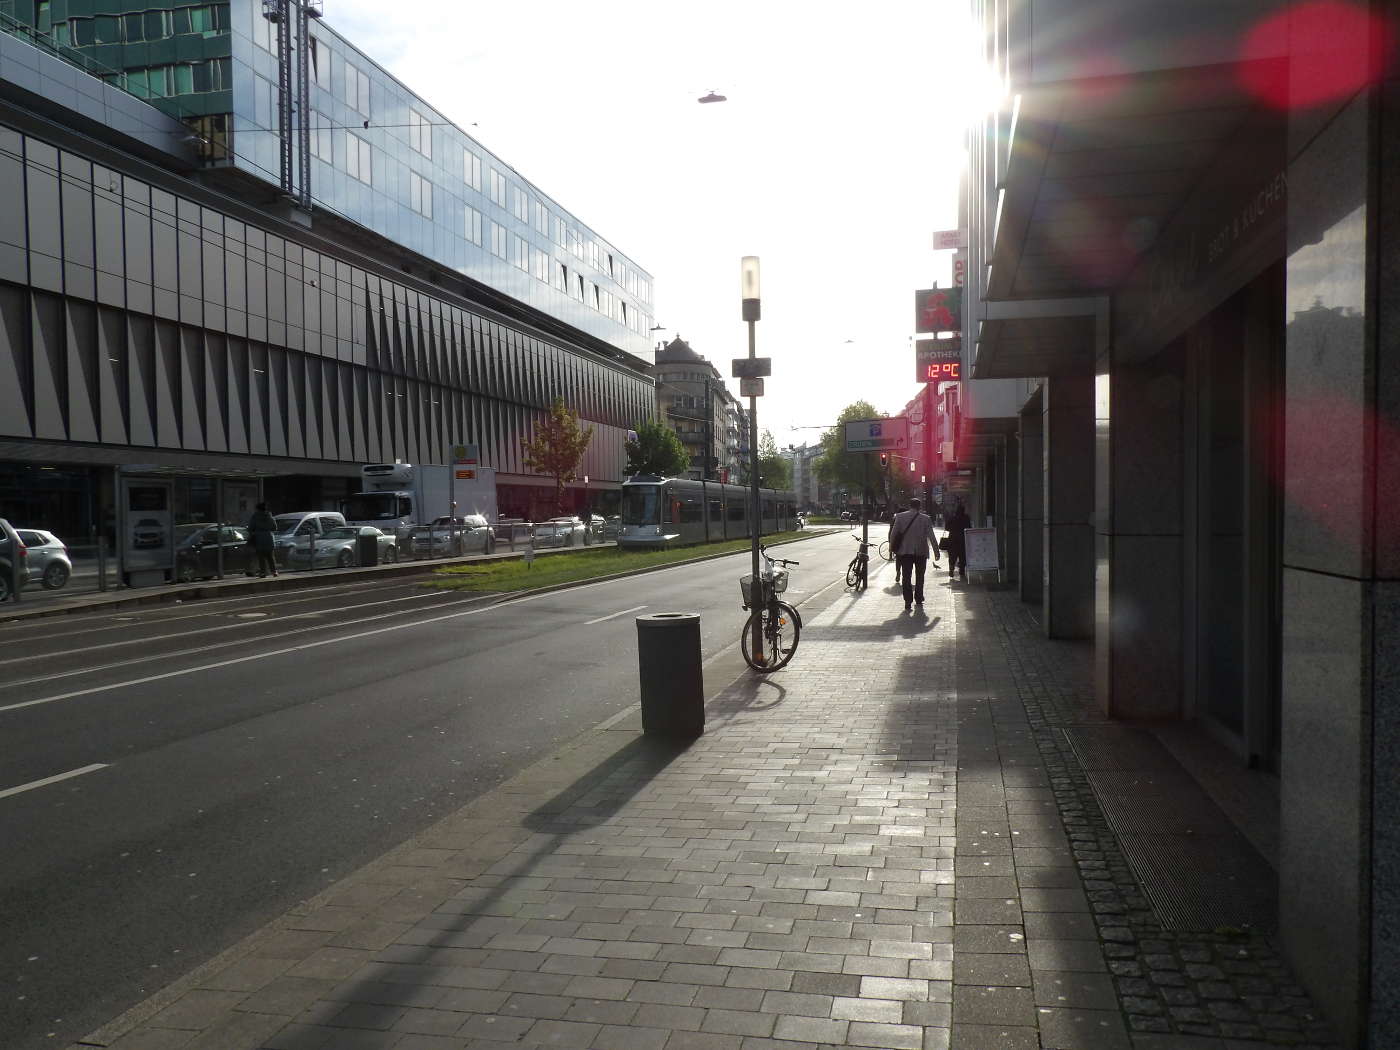 Jehovah's Witness in Duesseldorf – Religion with tie and collar